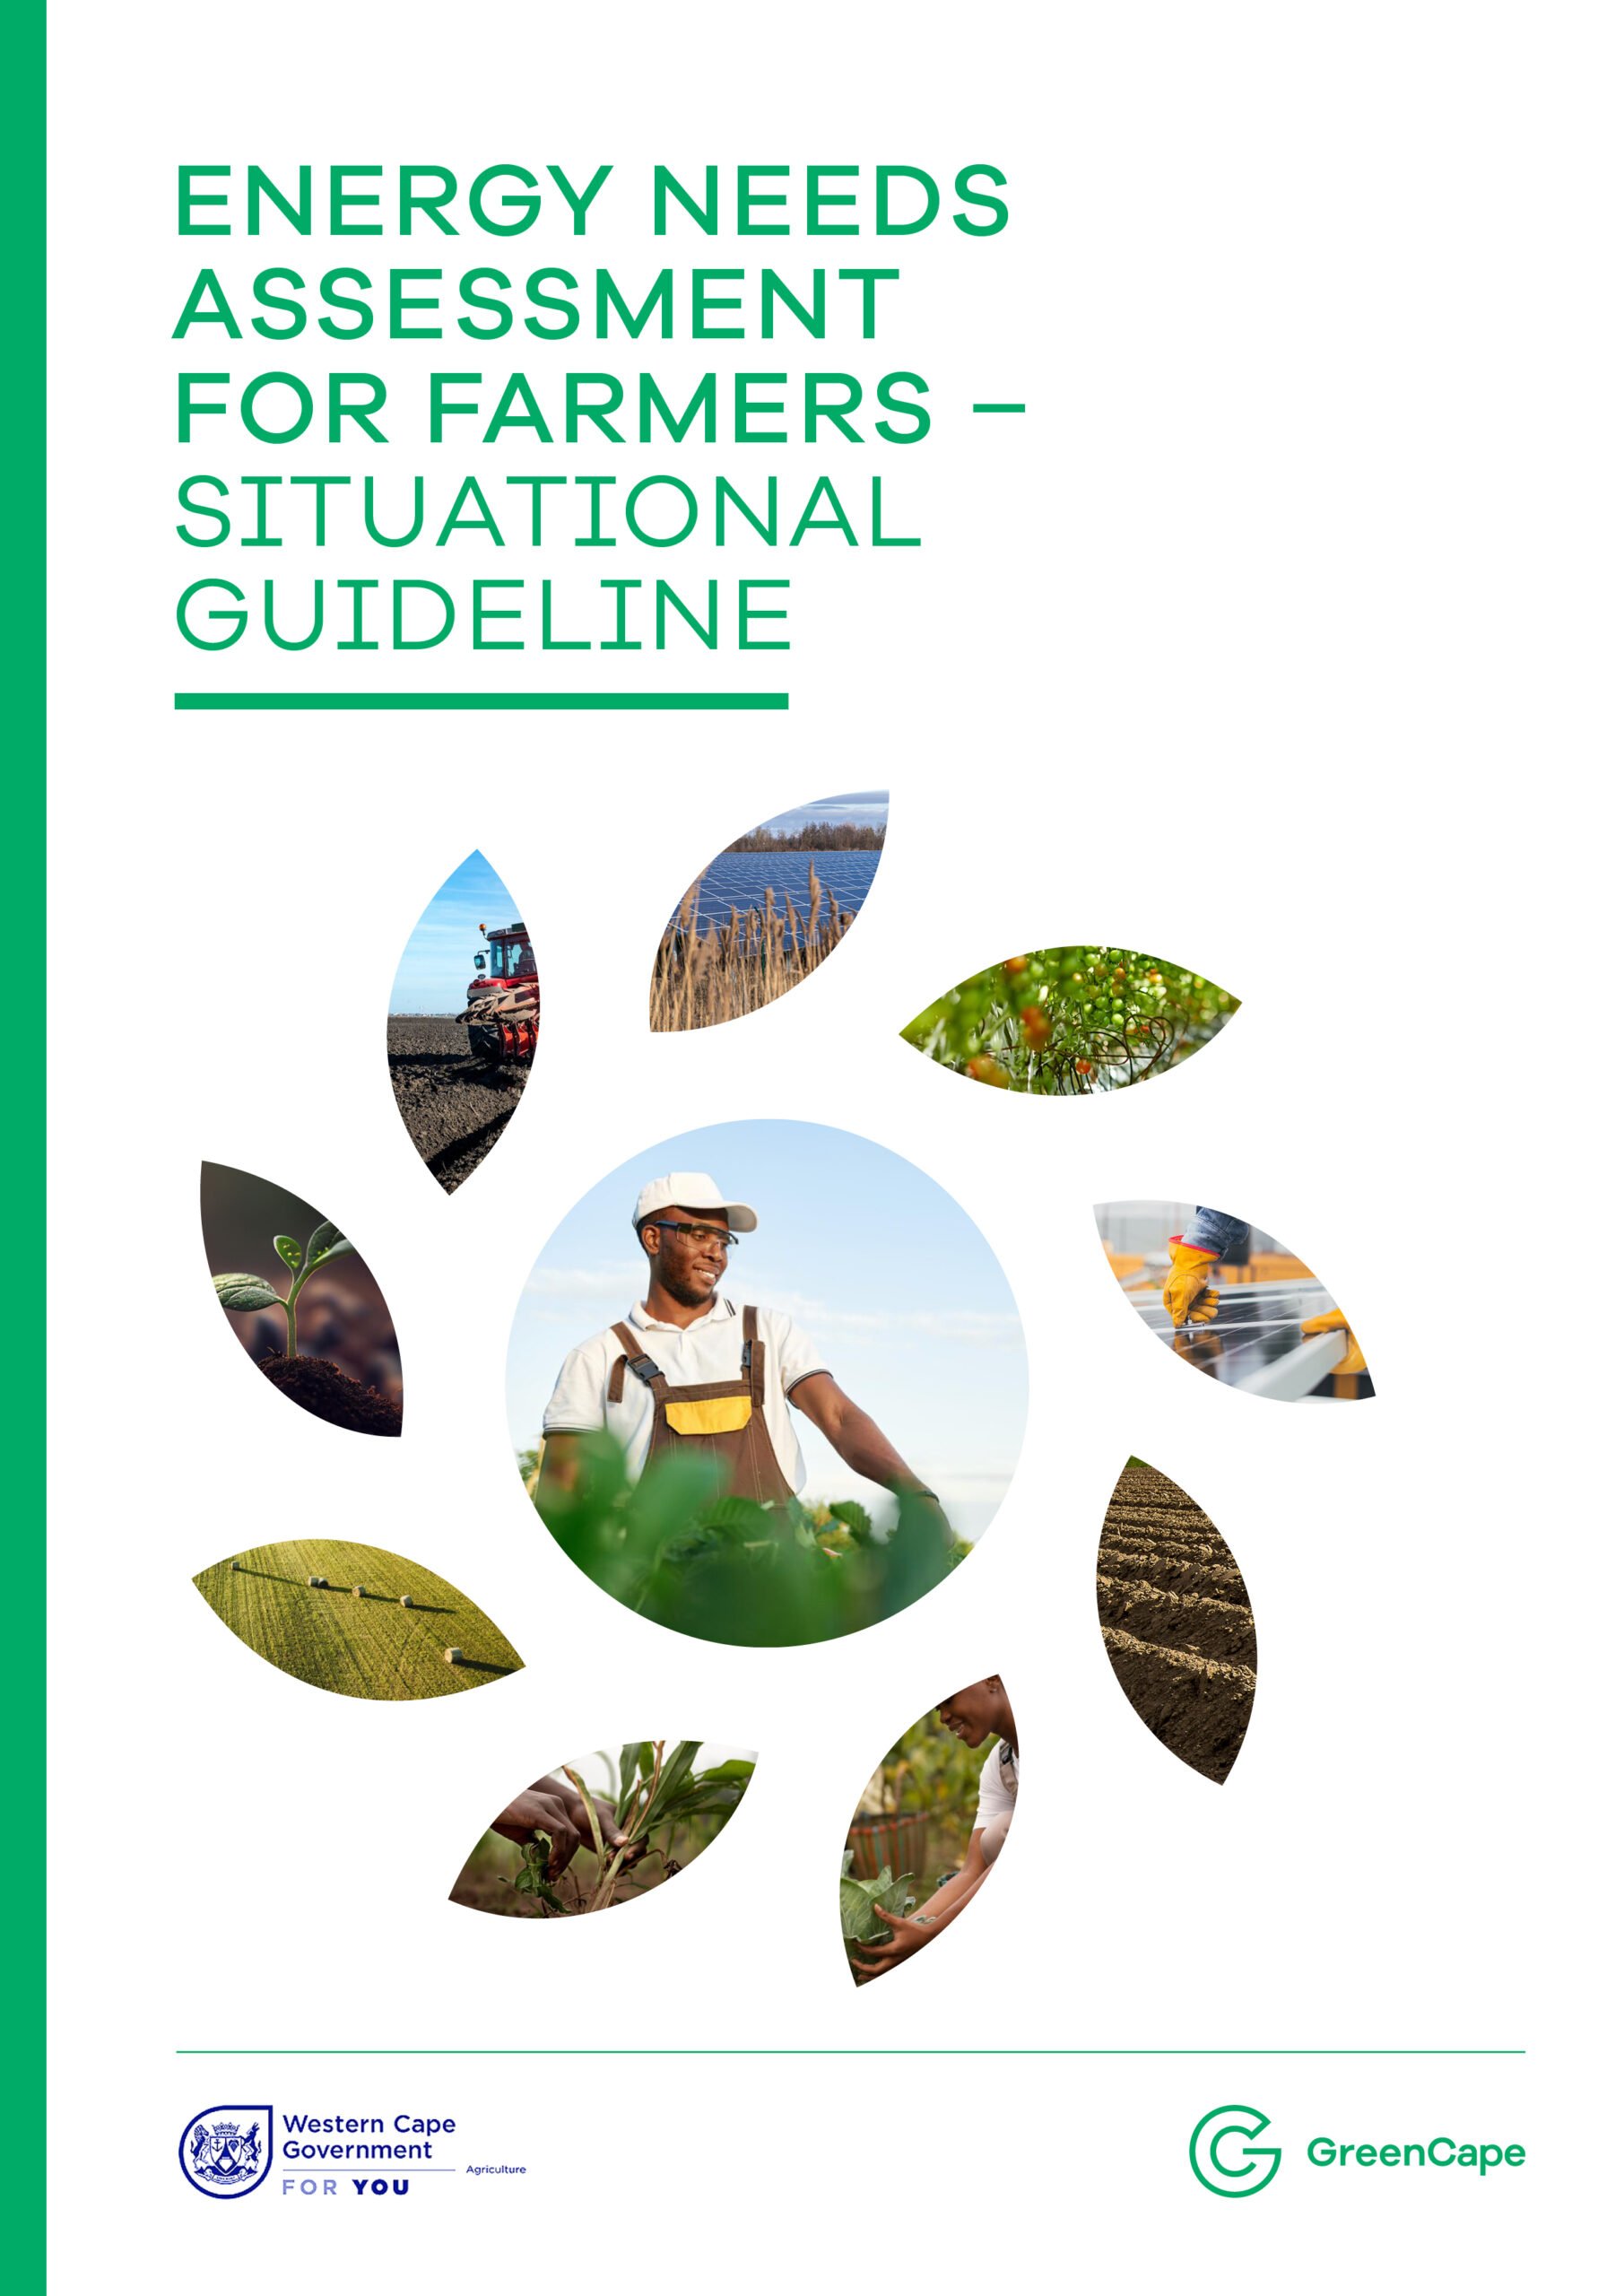 Energy needs assessment for farmers – Situational Guideline